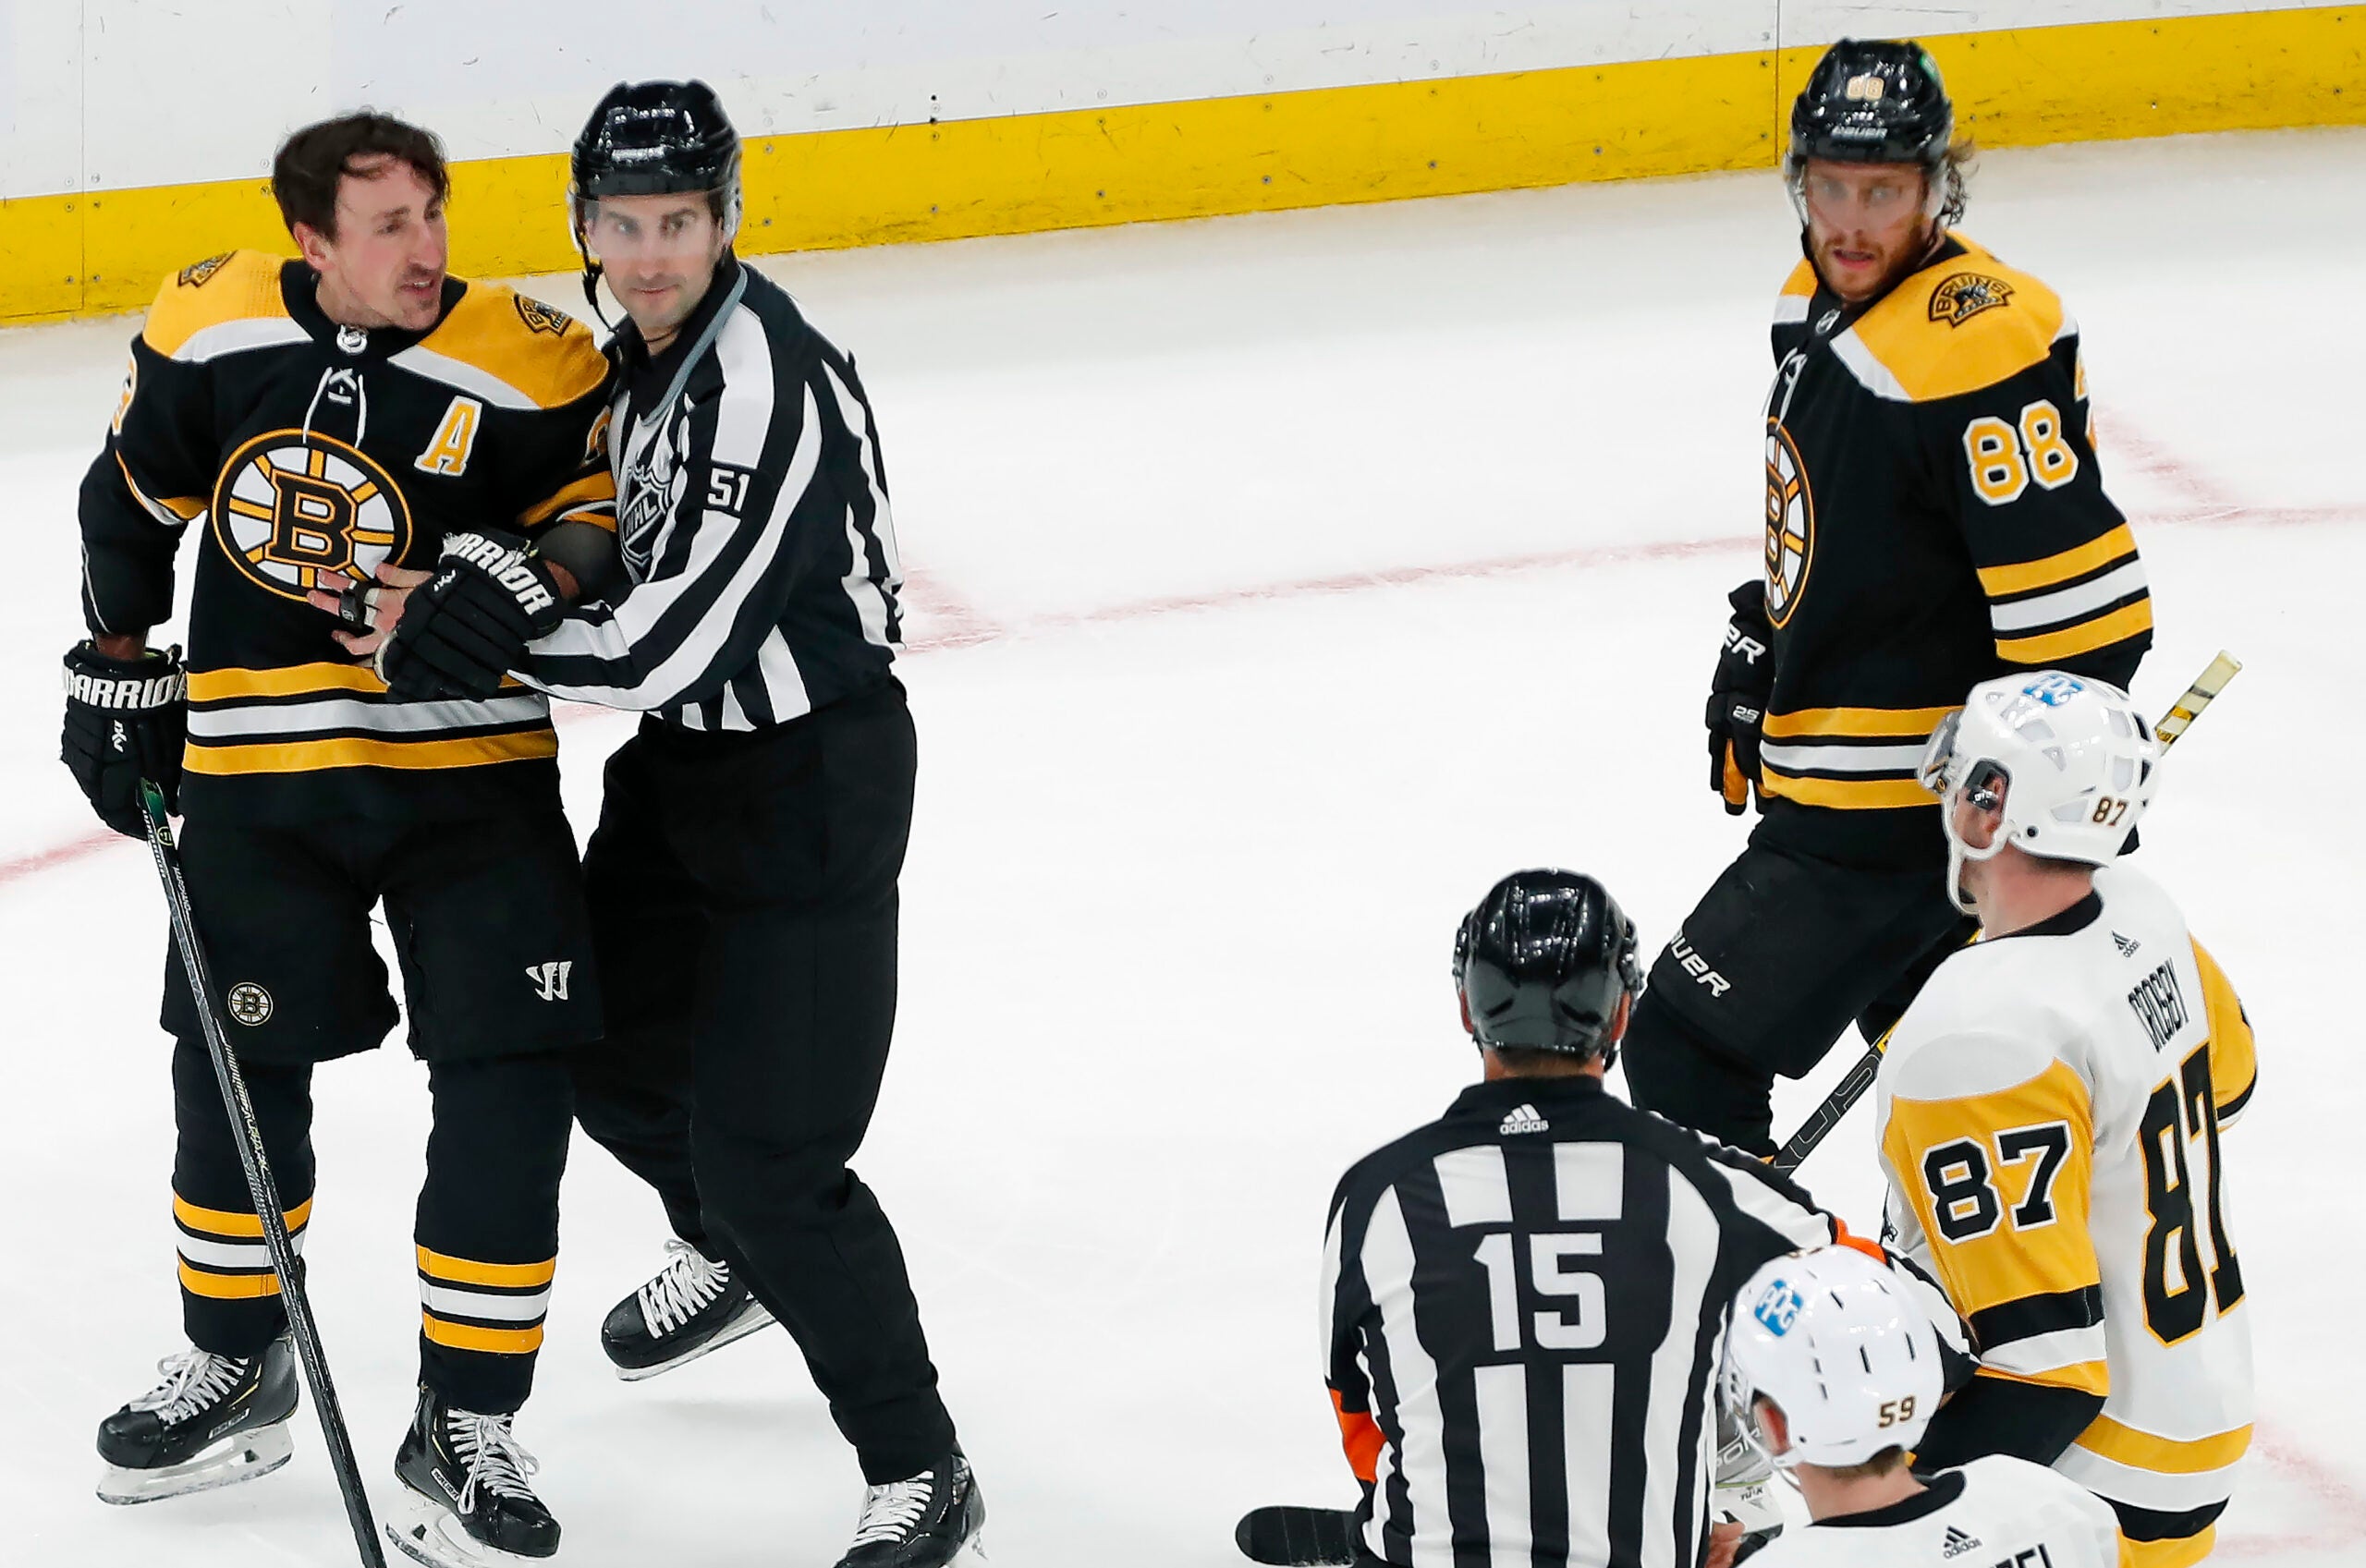 Once an unlikely star, Brad Marchand's now learning to lead